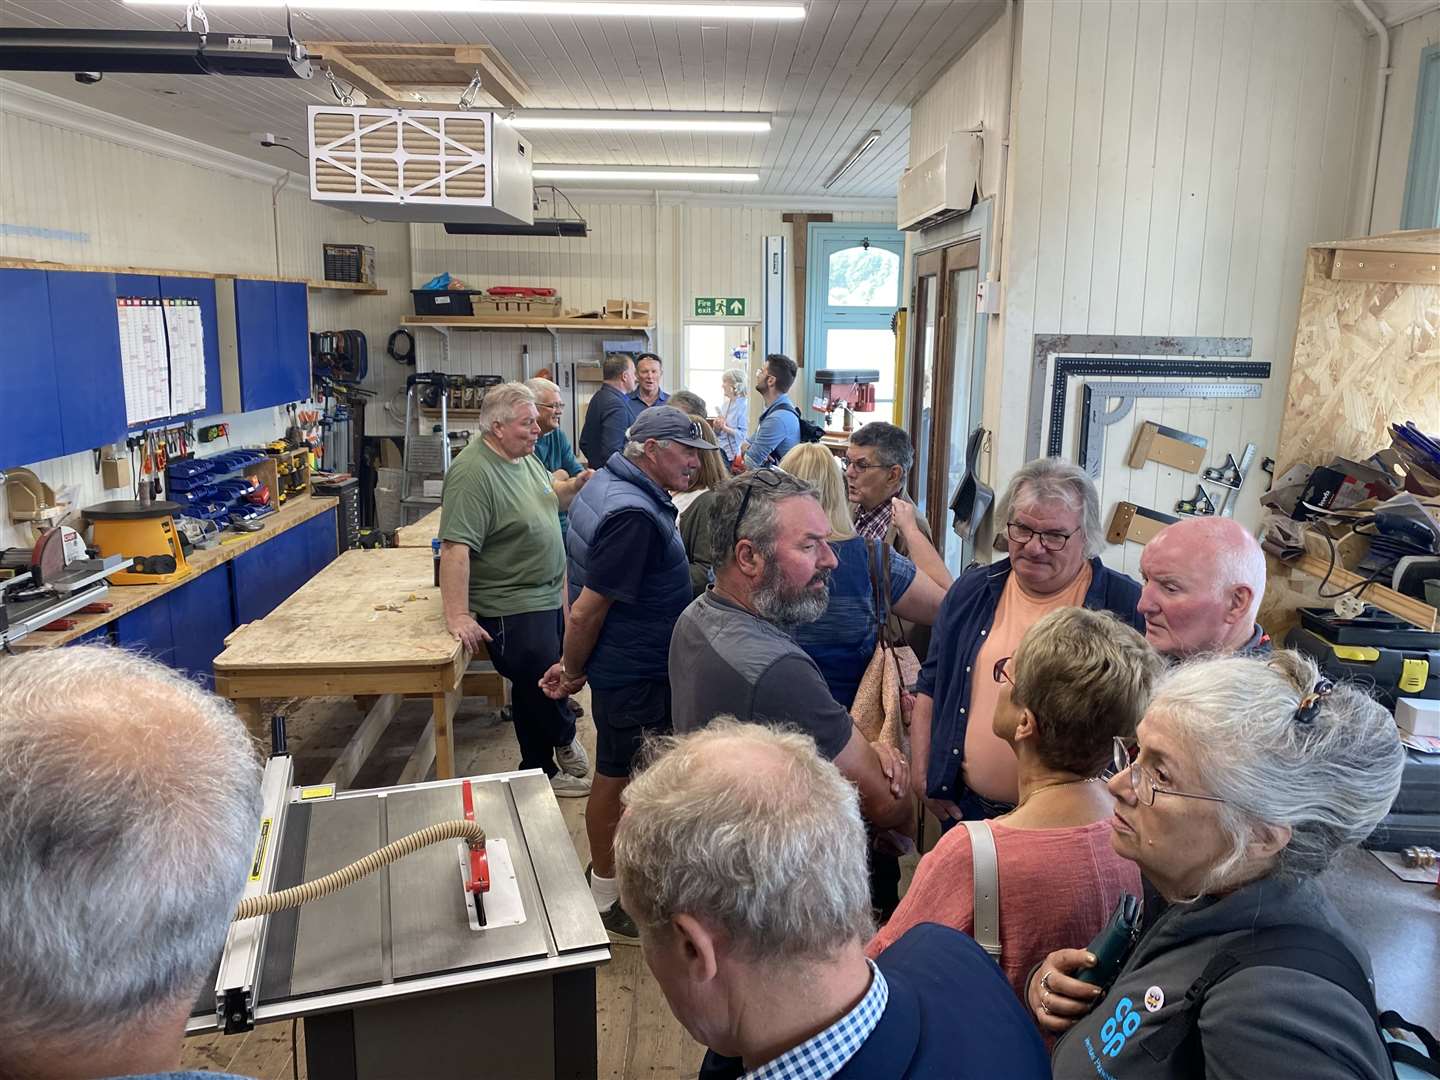 The West Fraser team met Nairn Men’s Shed to see what they were creating with the wood they donated.